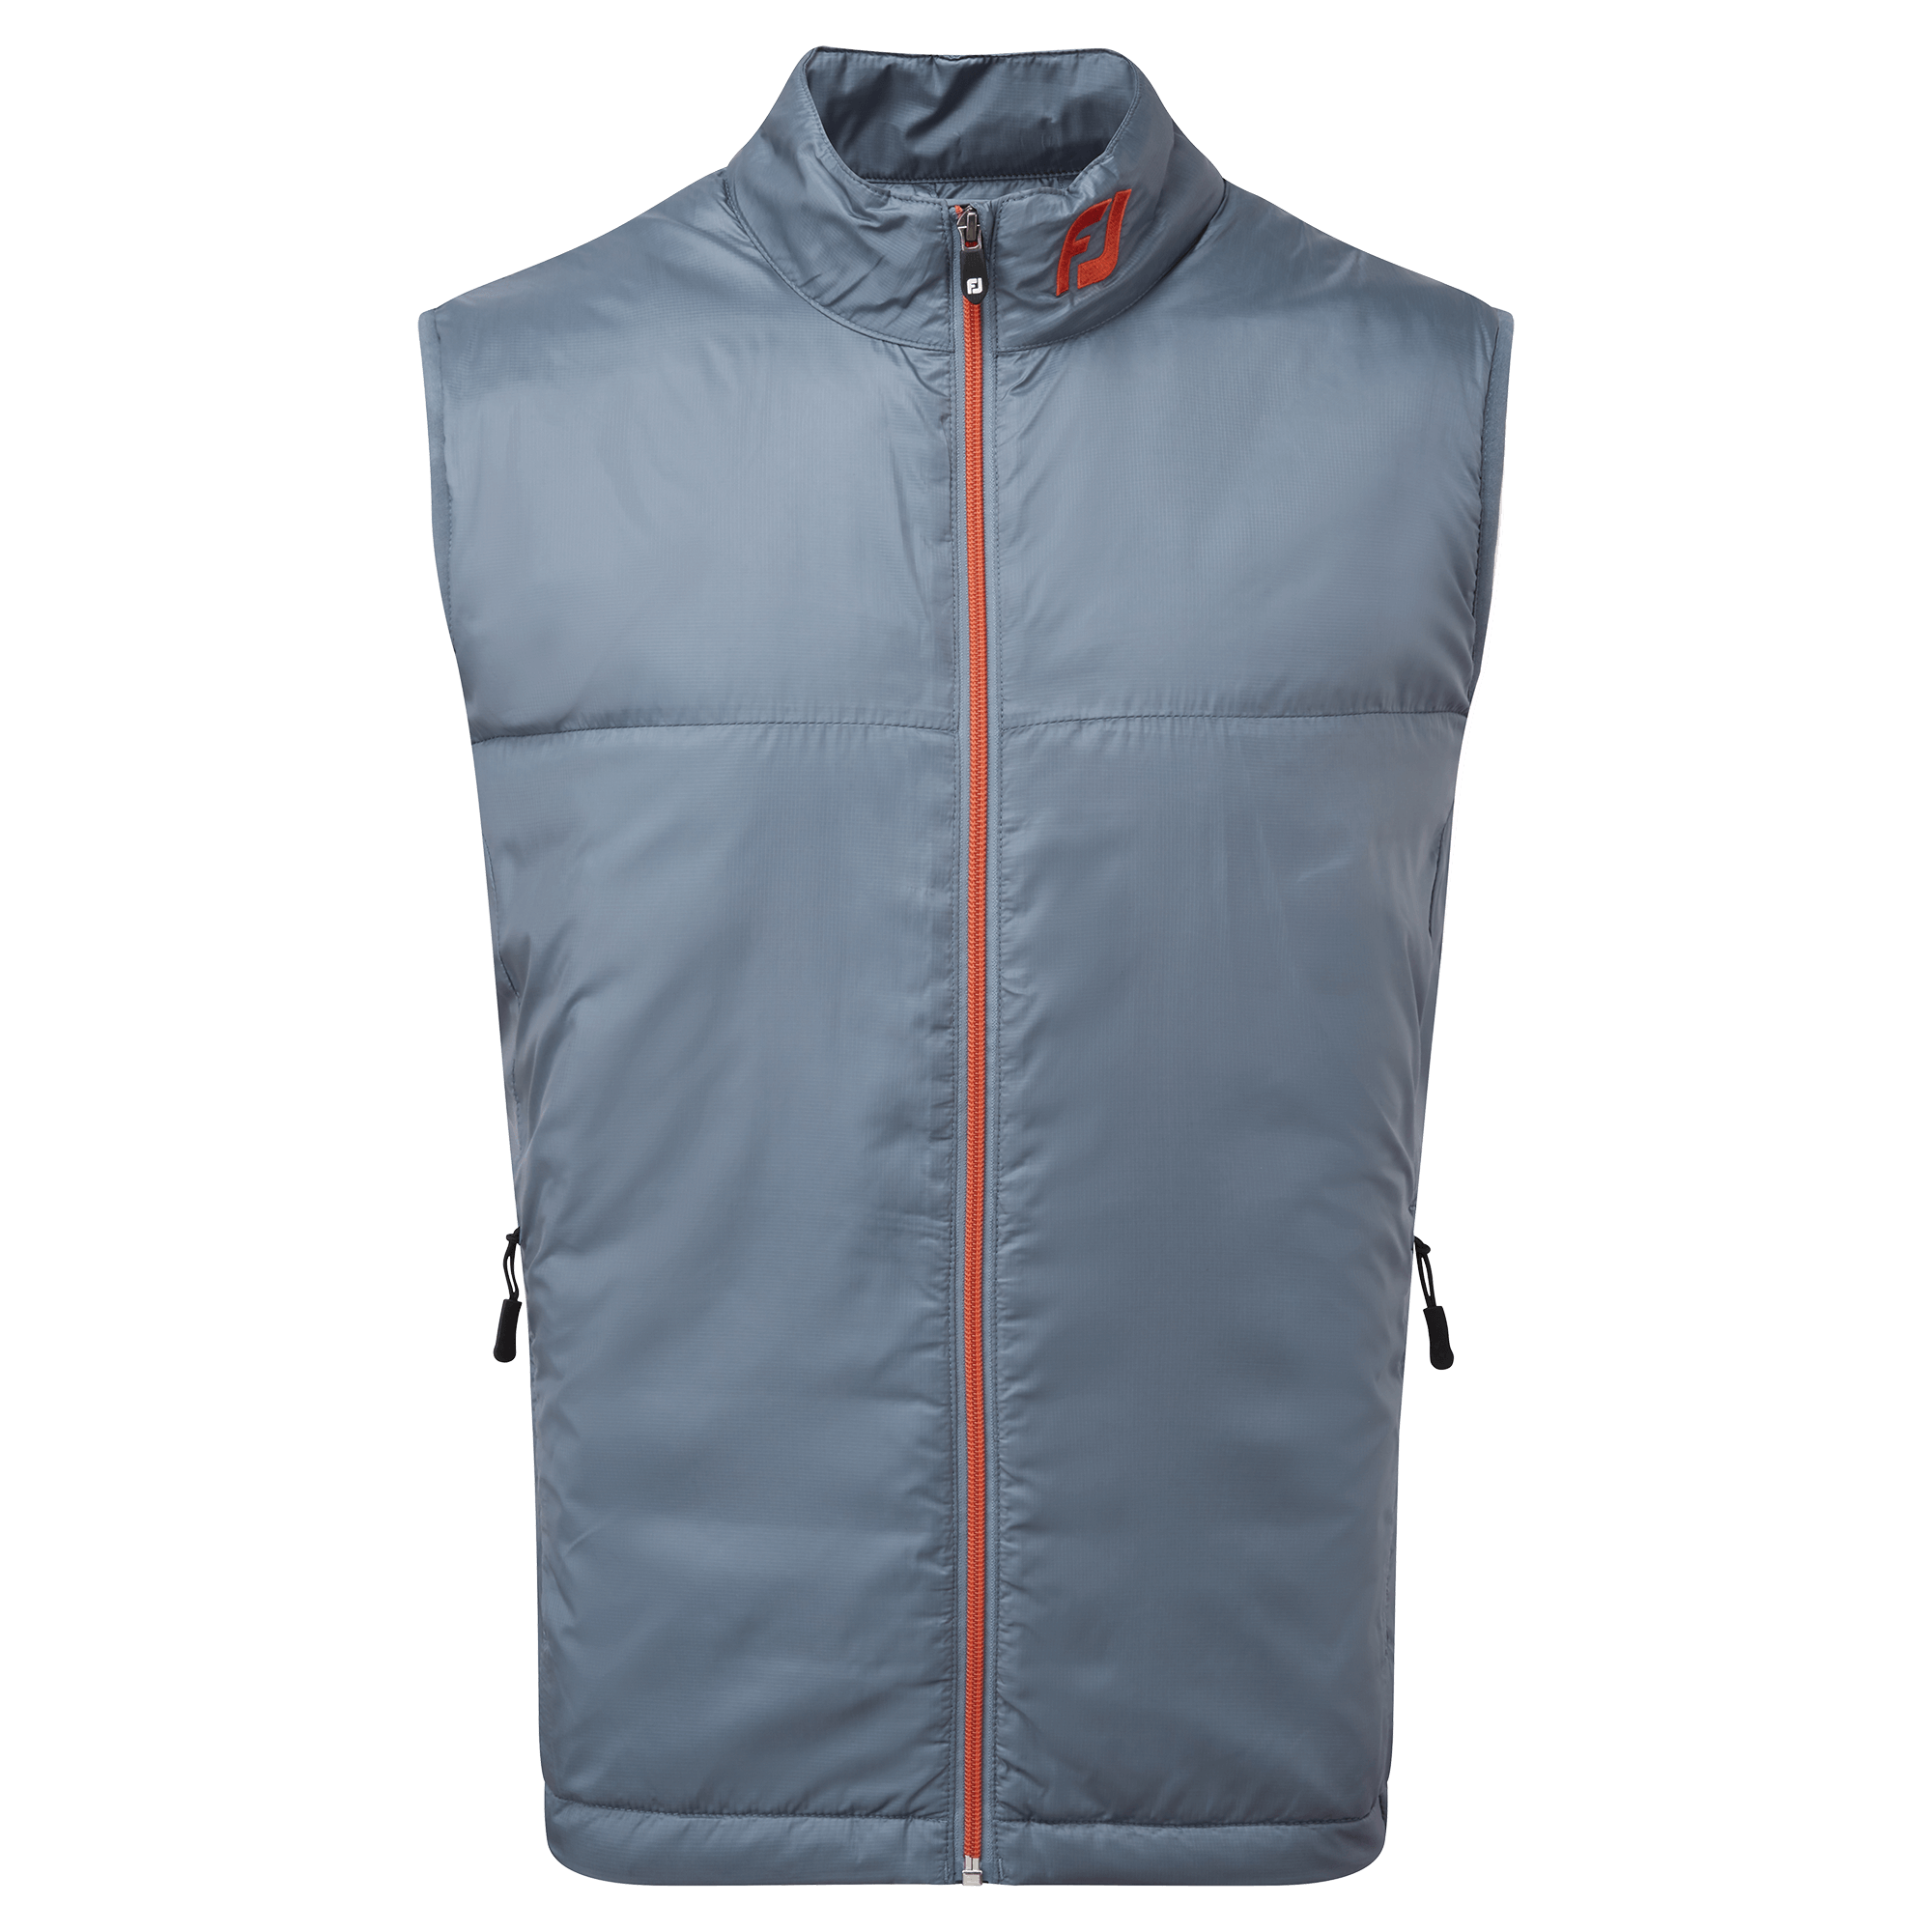 FootJoy Lightweight Thermal Insulated Golf Vest